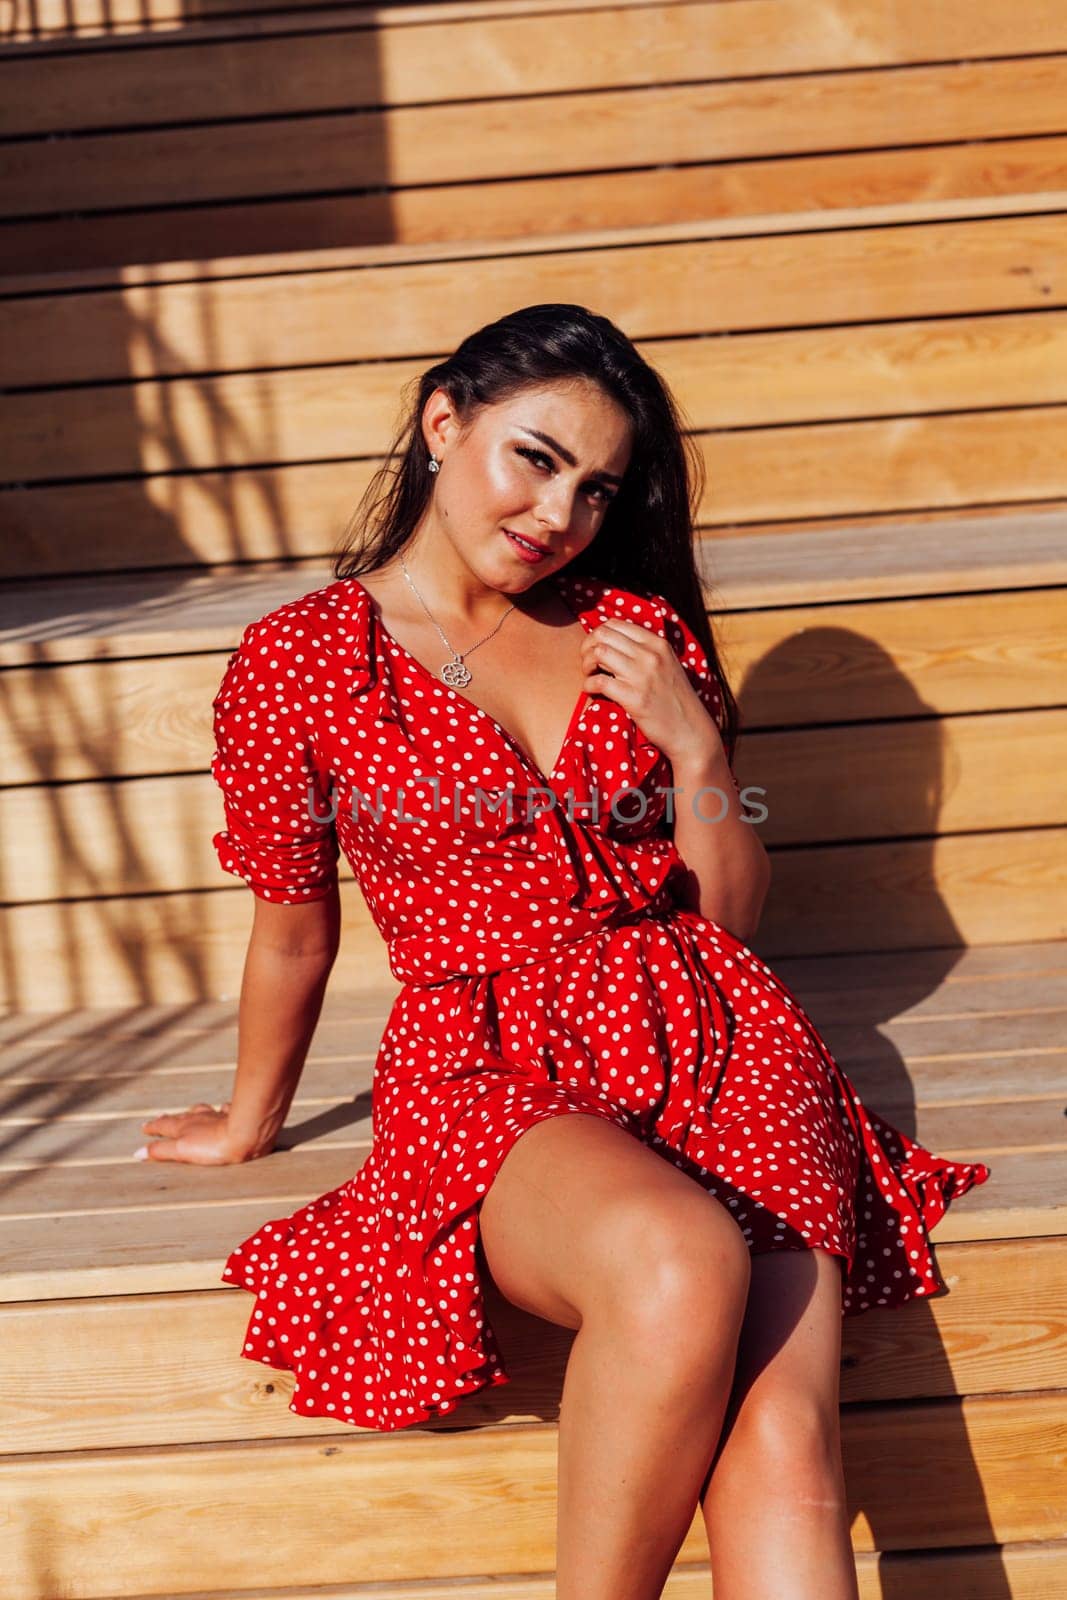 brunette woman in a red dress sits on wooden steps